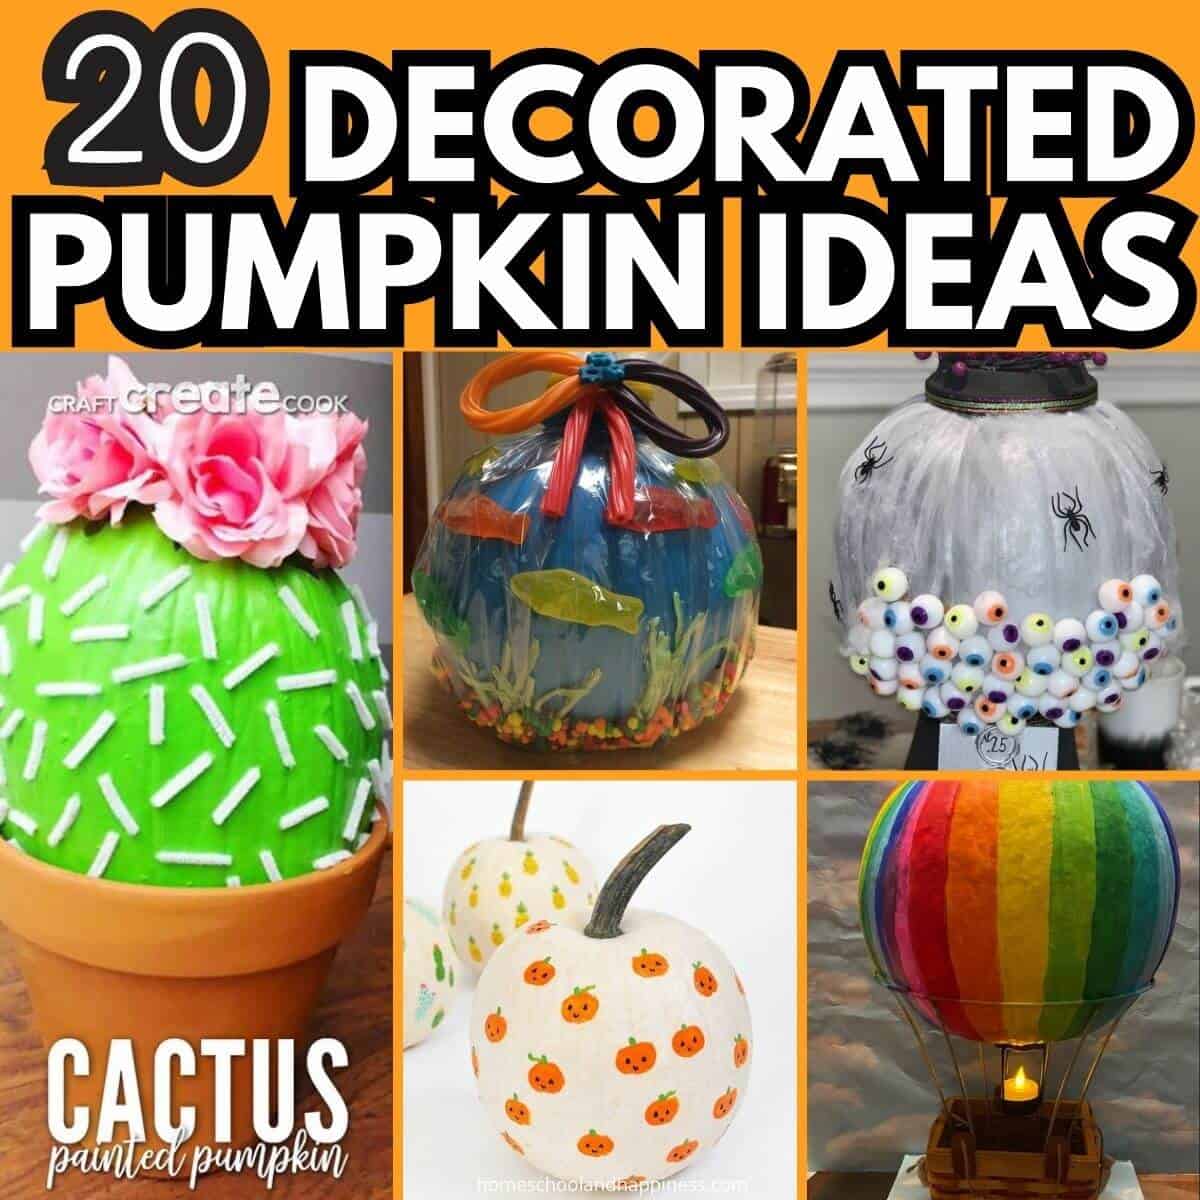 Ideas to Decorate Pumpkins That Are Creative and Fun